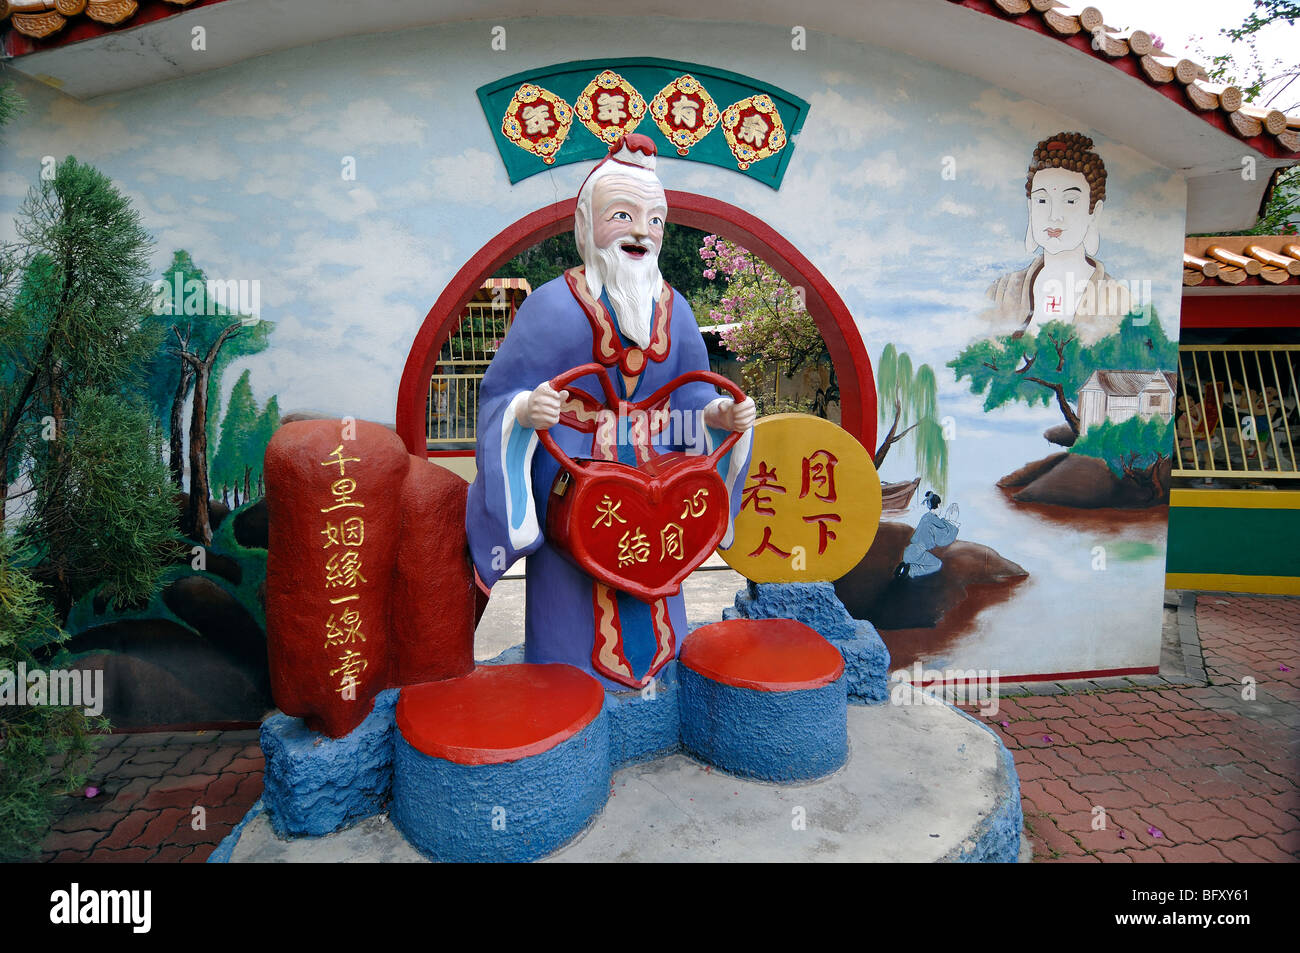 The Celestial Matchmaker, Marriage Guidance or Dating God at Ling Sen Tong Chinese Tao or Taoist Cave Temple, Ipoh, Perak, Malaysia Stock Photo